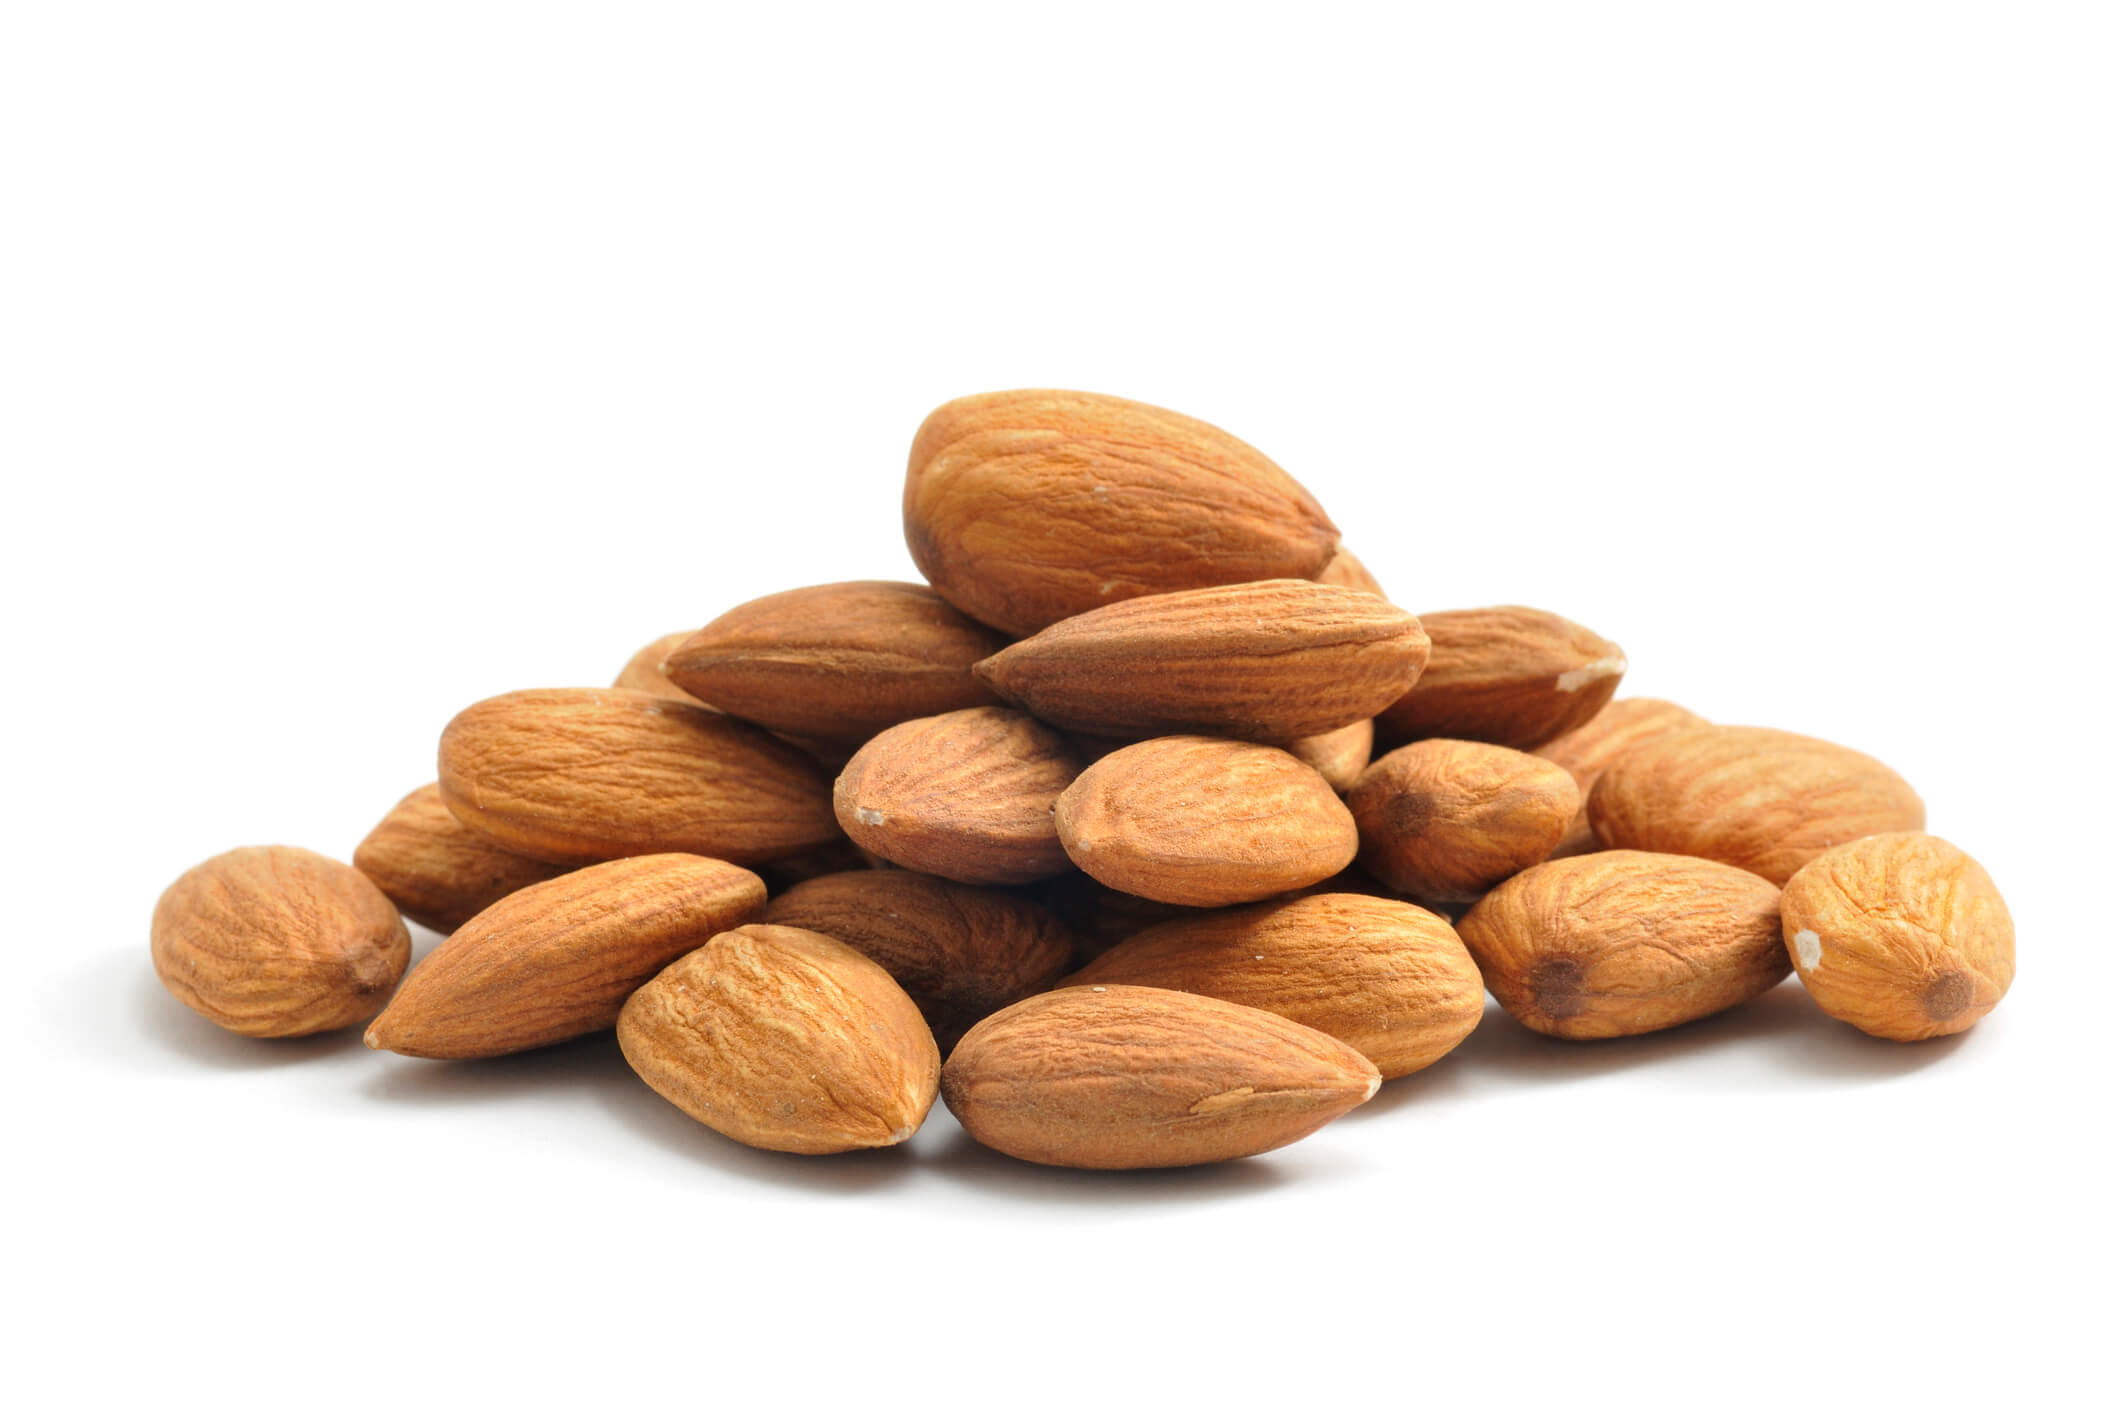 a pile of almonds with no shells